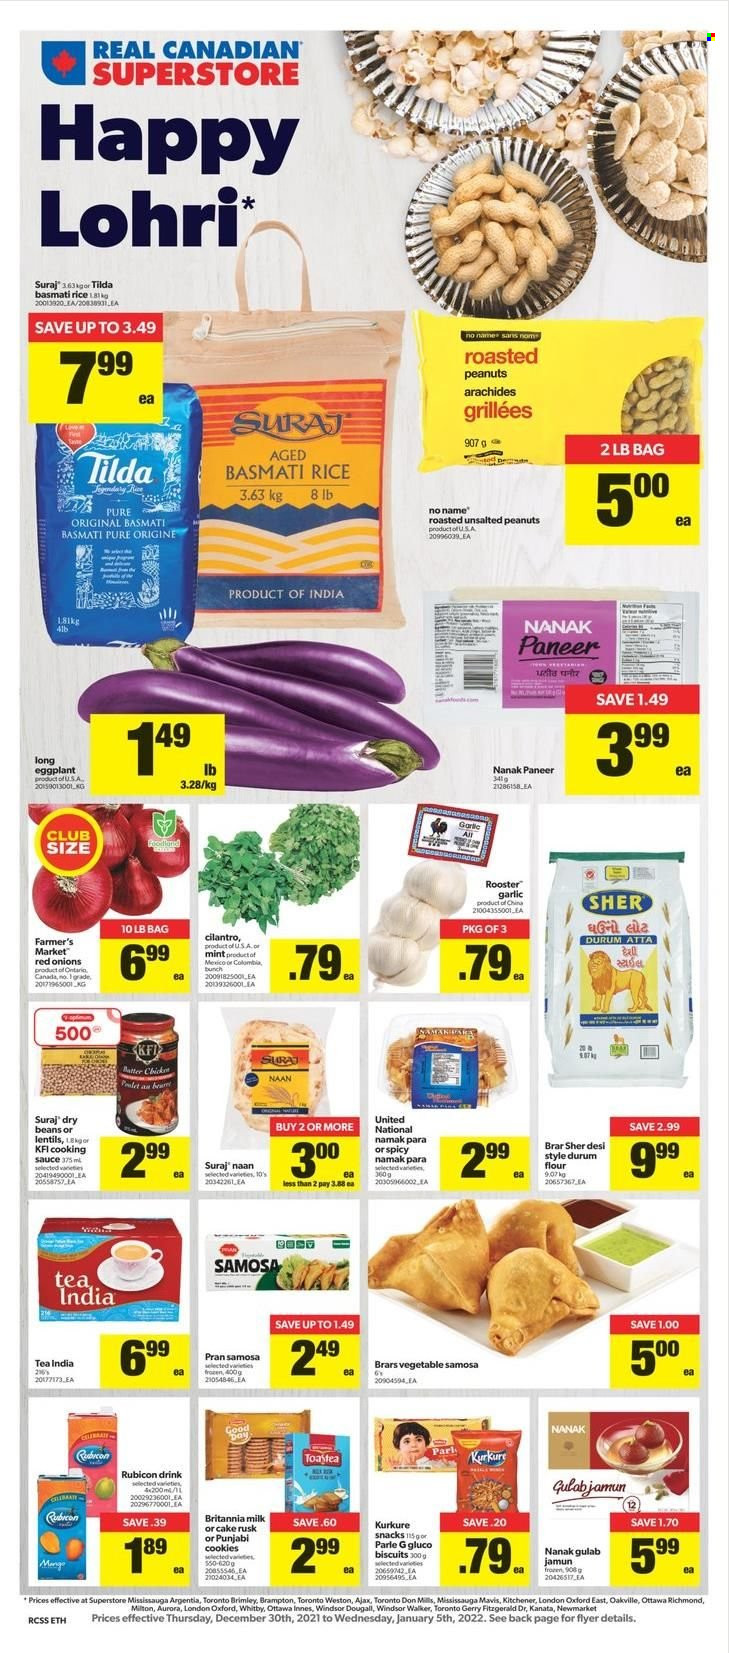 Real Canadian Superstore Flyer - December 30, 2021 - January 05, 2022 - Sales products - cake, rusks, beans, garlic, red onions, onion, eggplant, No Name, sauce, paneer, milk, snack, biscuit, Parle, flour, lentils, basmati rice, rice, dry beans, cilantro, roasted peanuts, peanuts, tea, nappies, Ajax. Page 1.